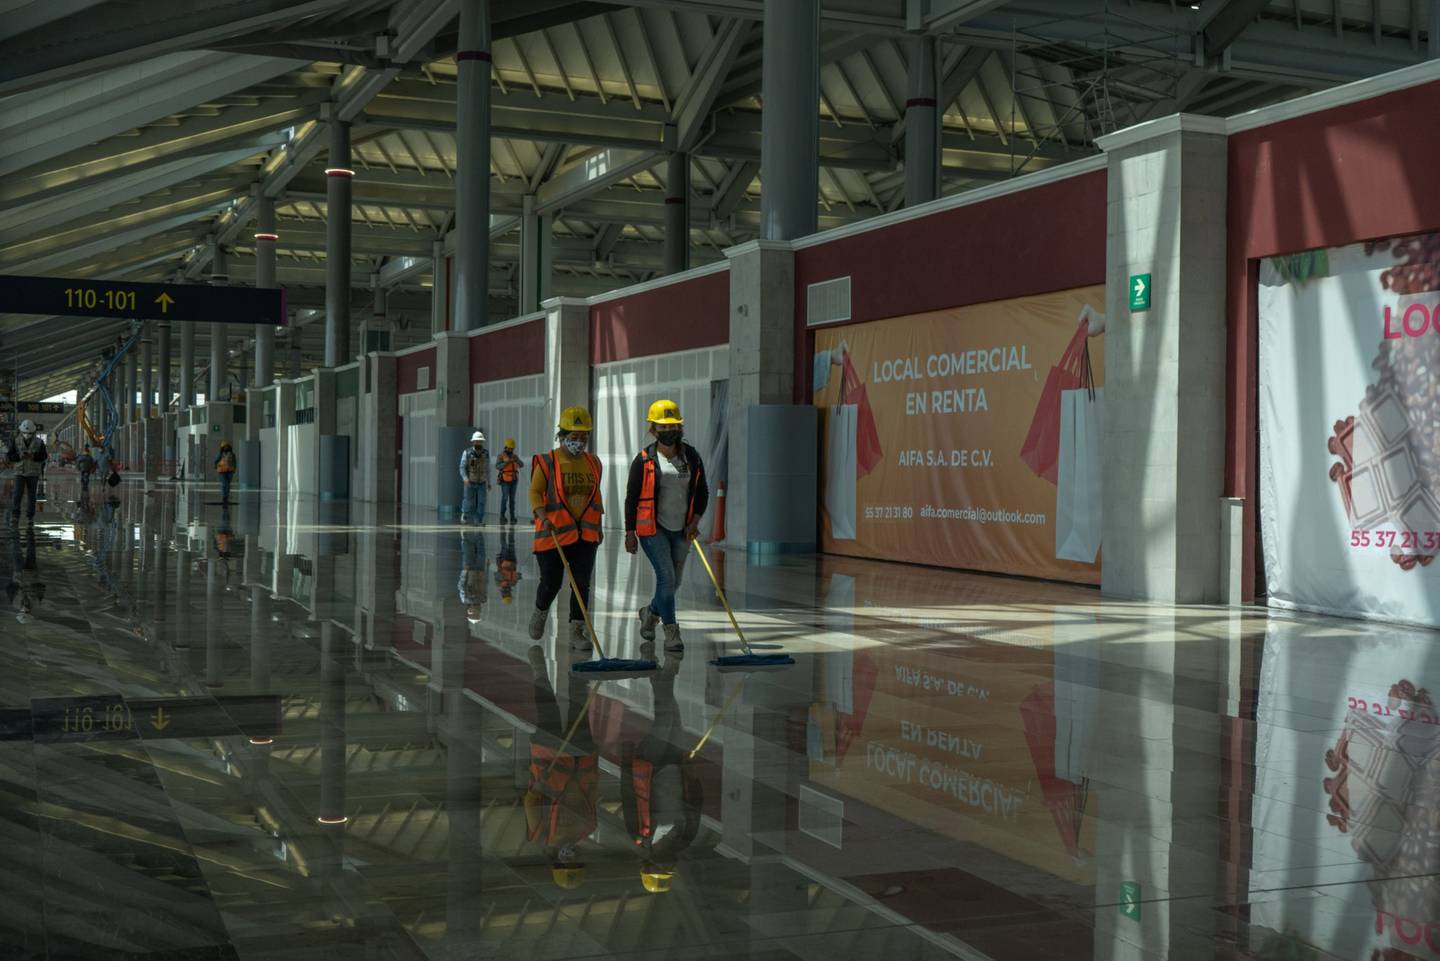 Contractors sweeps the floor of a terminal under construction at Felipe Angeles International Airport (AIFA) in Zumpango, Mexico, on Sunday, March 13, 2022.  Felipe Angeles International Airport is expected to open on March 21.dfd